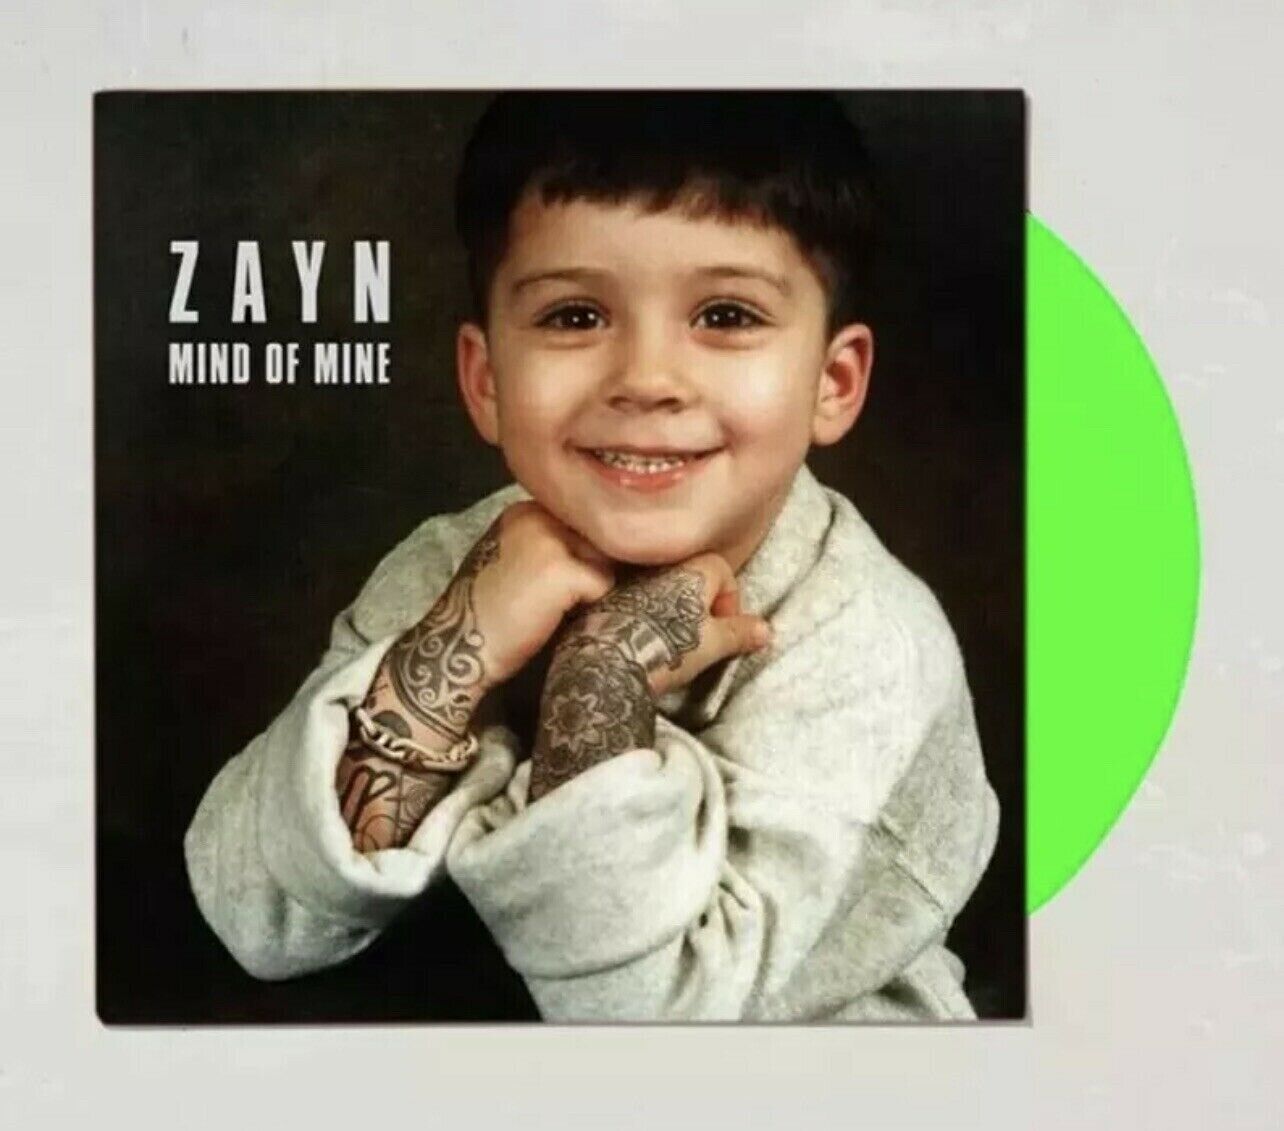 Mind of Mine [Deluxe Edition] by ZAYN (Vinyl, Aug-2016, 2 Discs, RCA) for sale online | eBay | eBay US